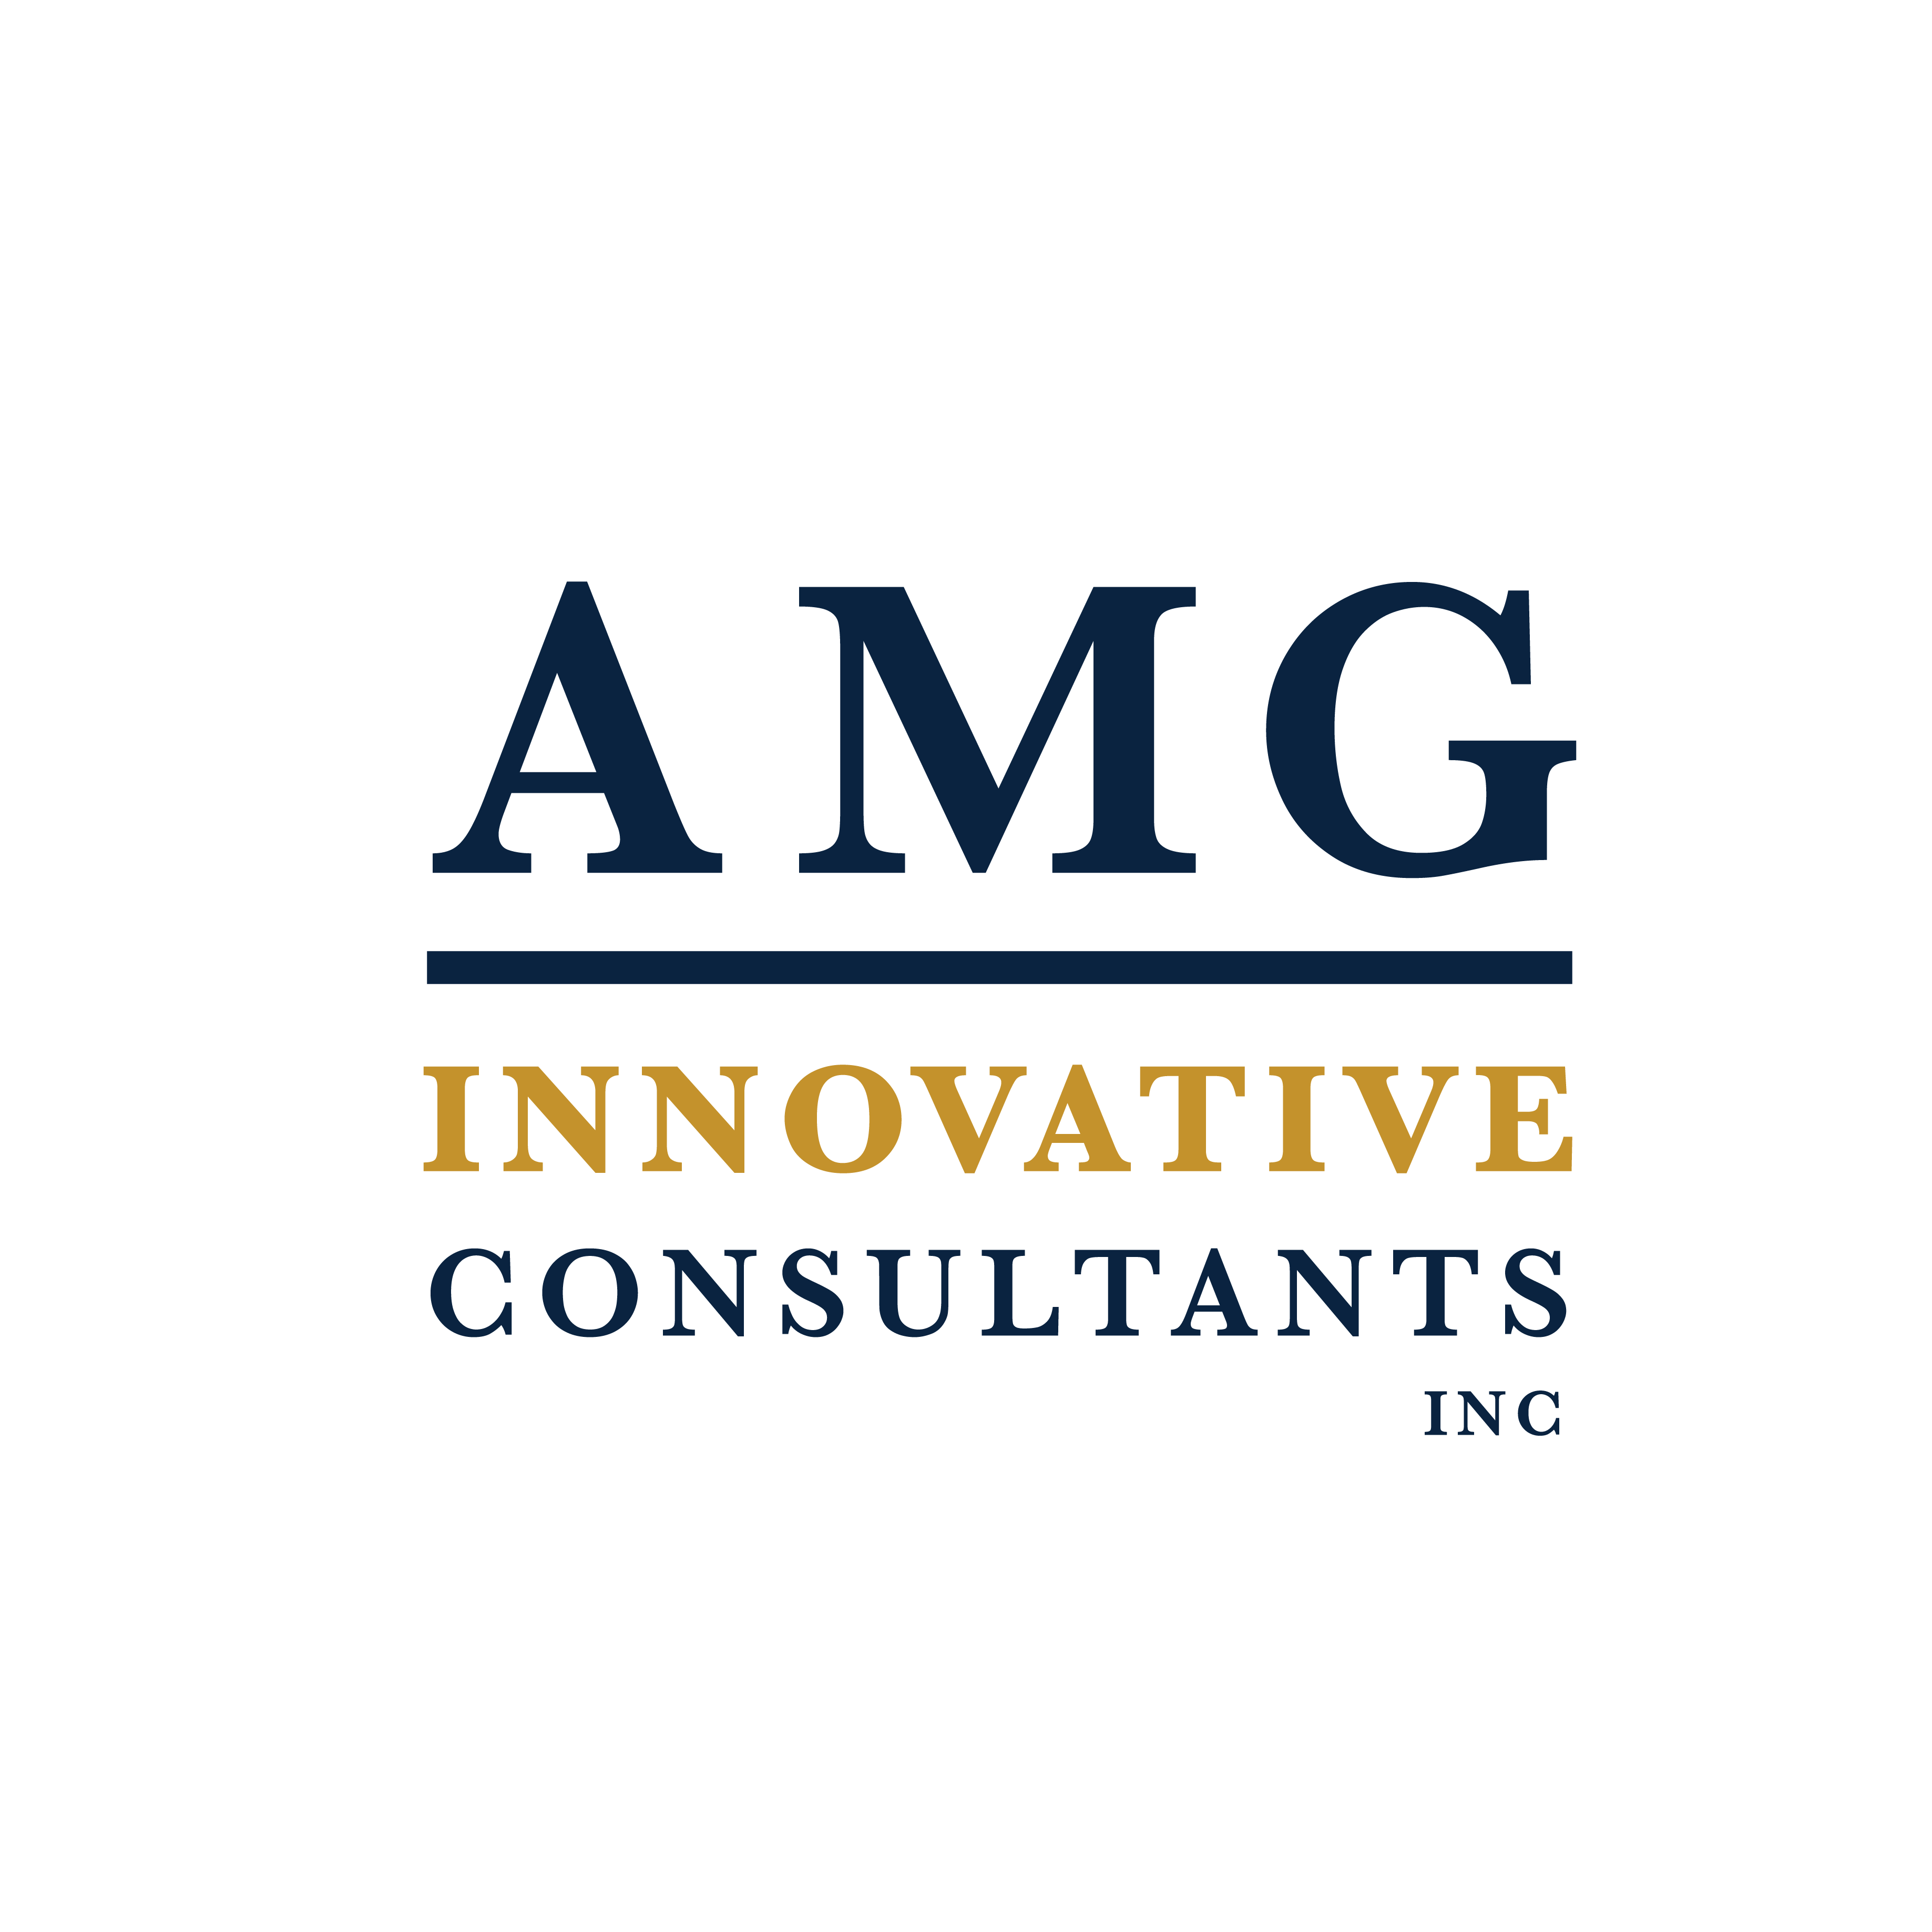 White background with "AMG Innovative Consultants, INC" written across the image.